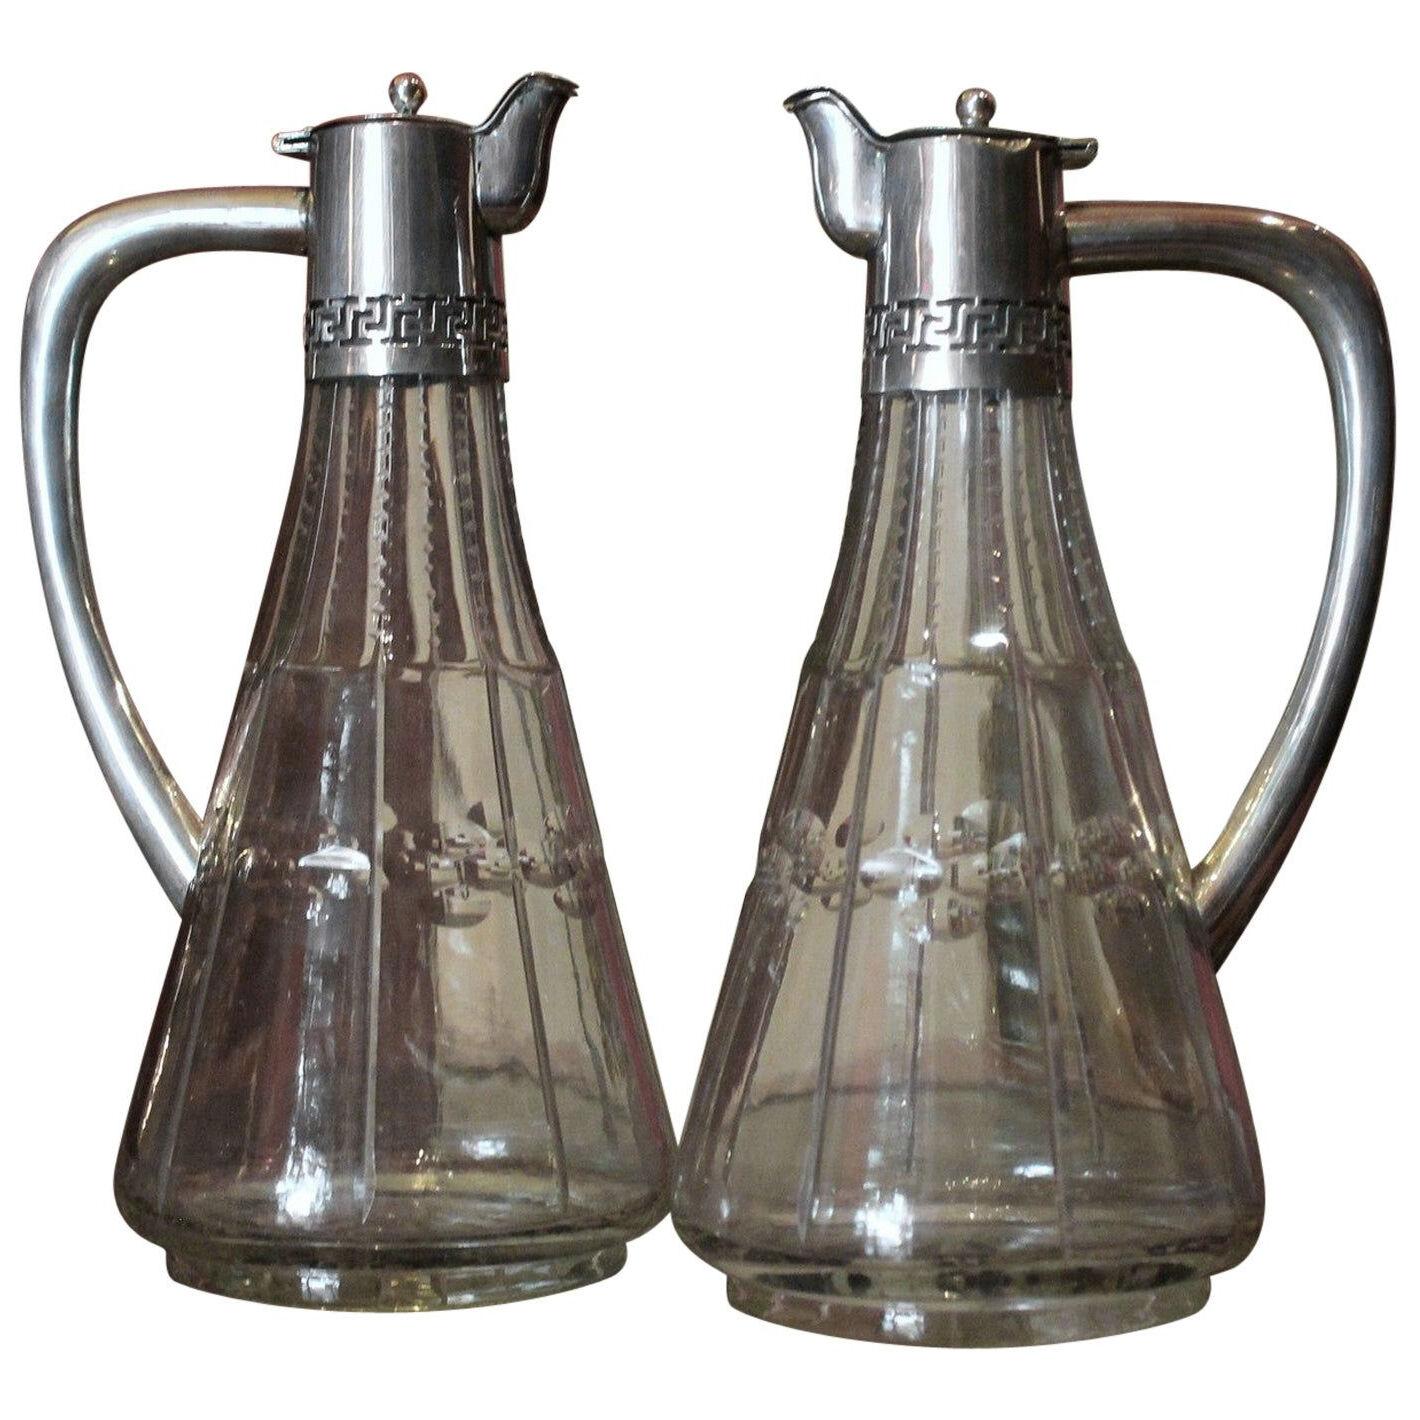 19th Century English Cut Glass and Sterling Silver Oil and Vinegar Cruet Set